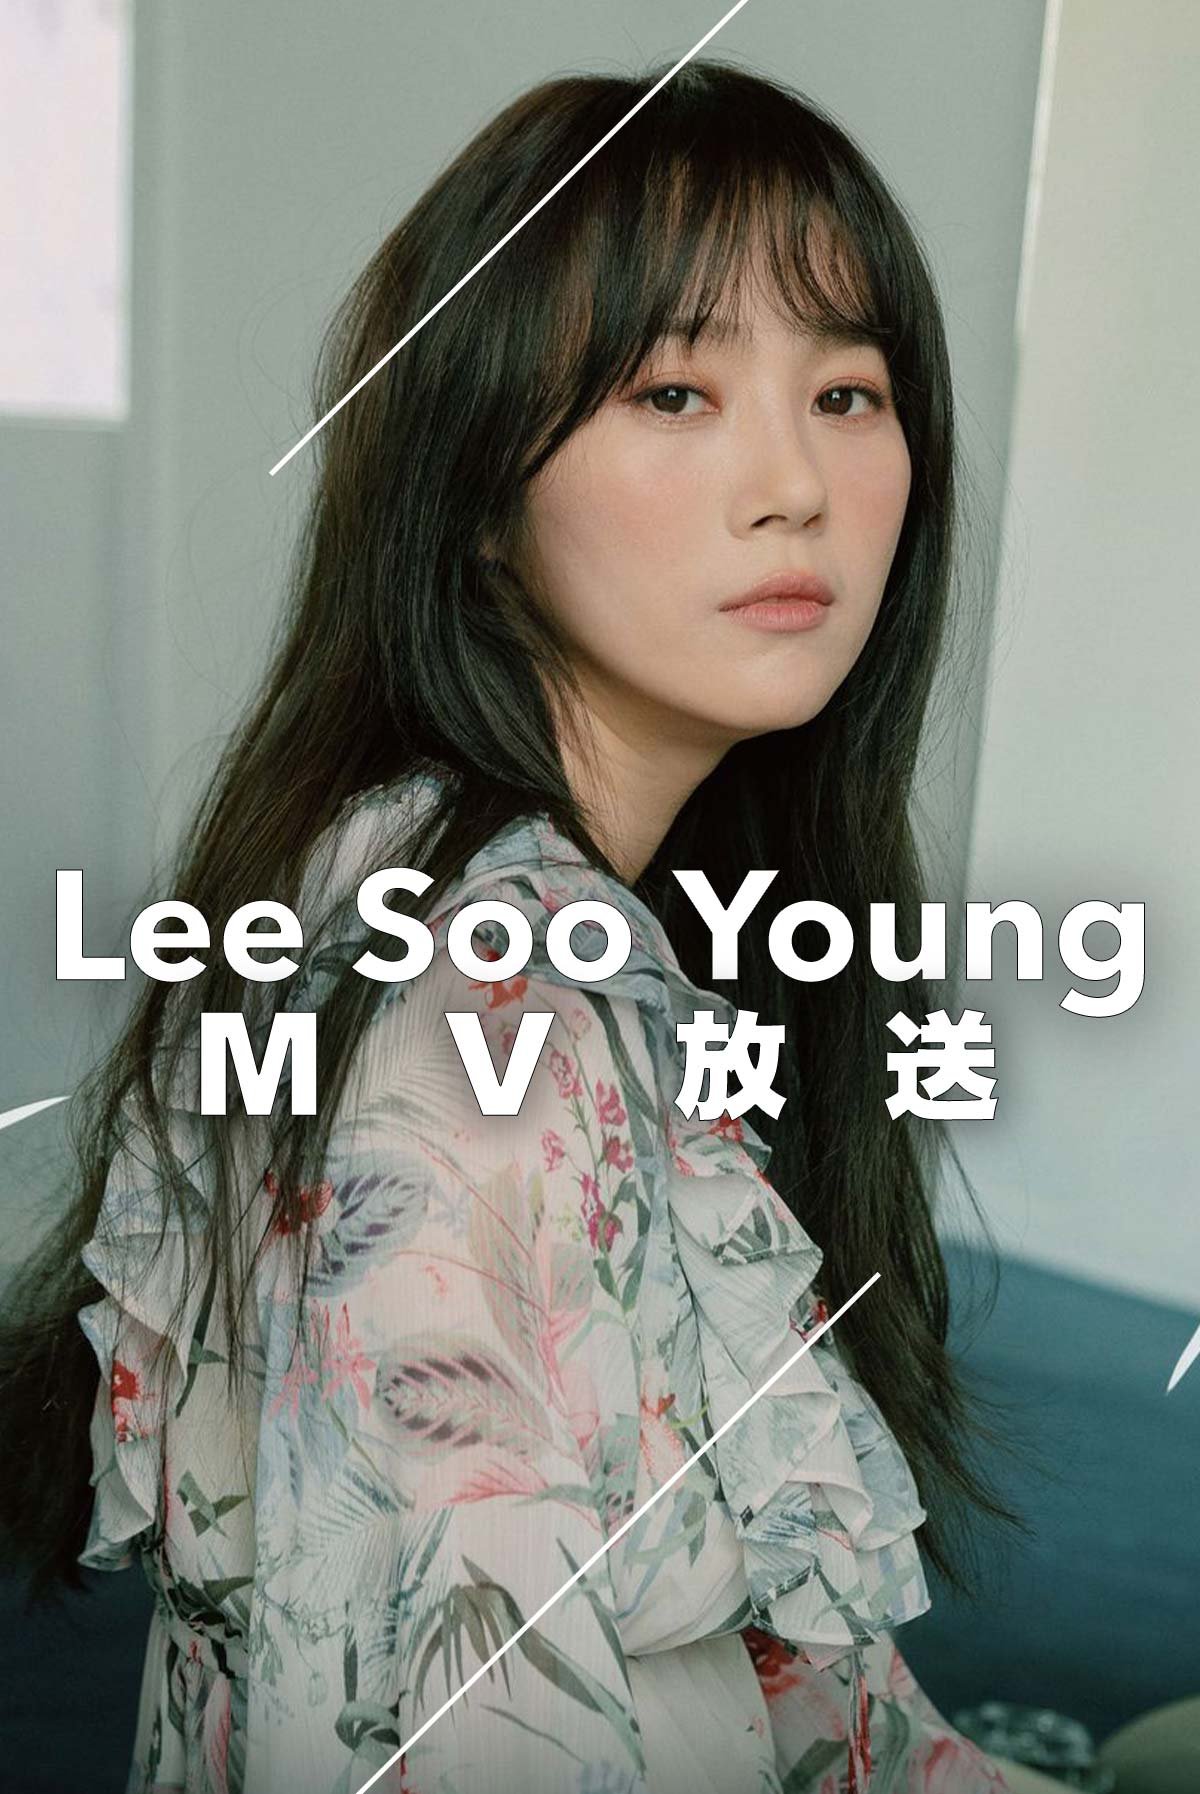 Now Player - Lee Soo Young Music Videos